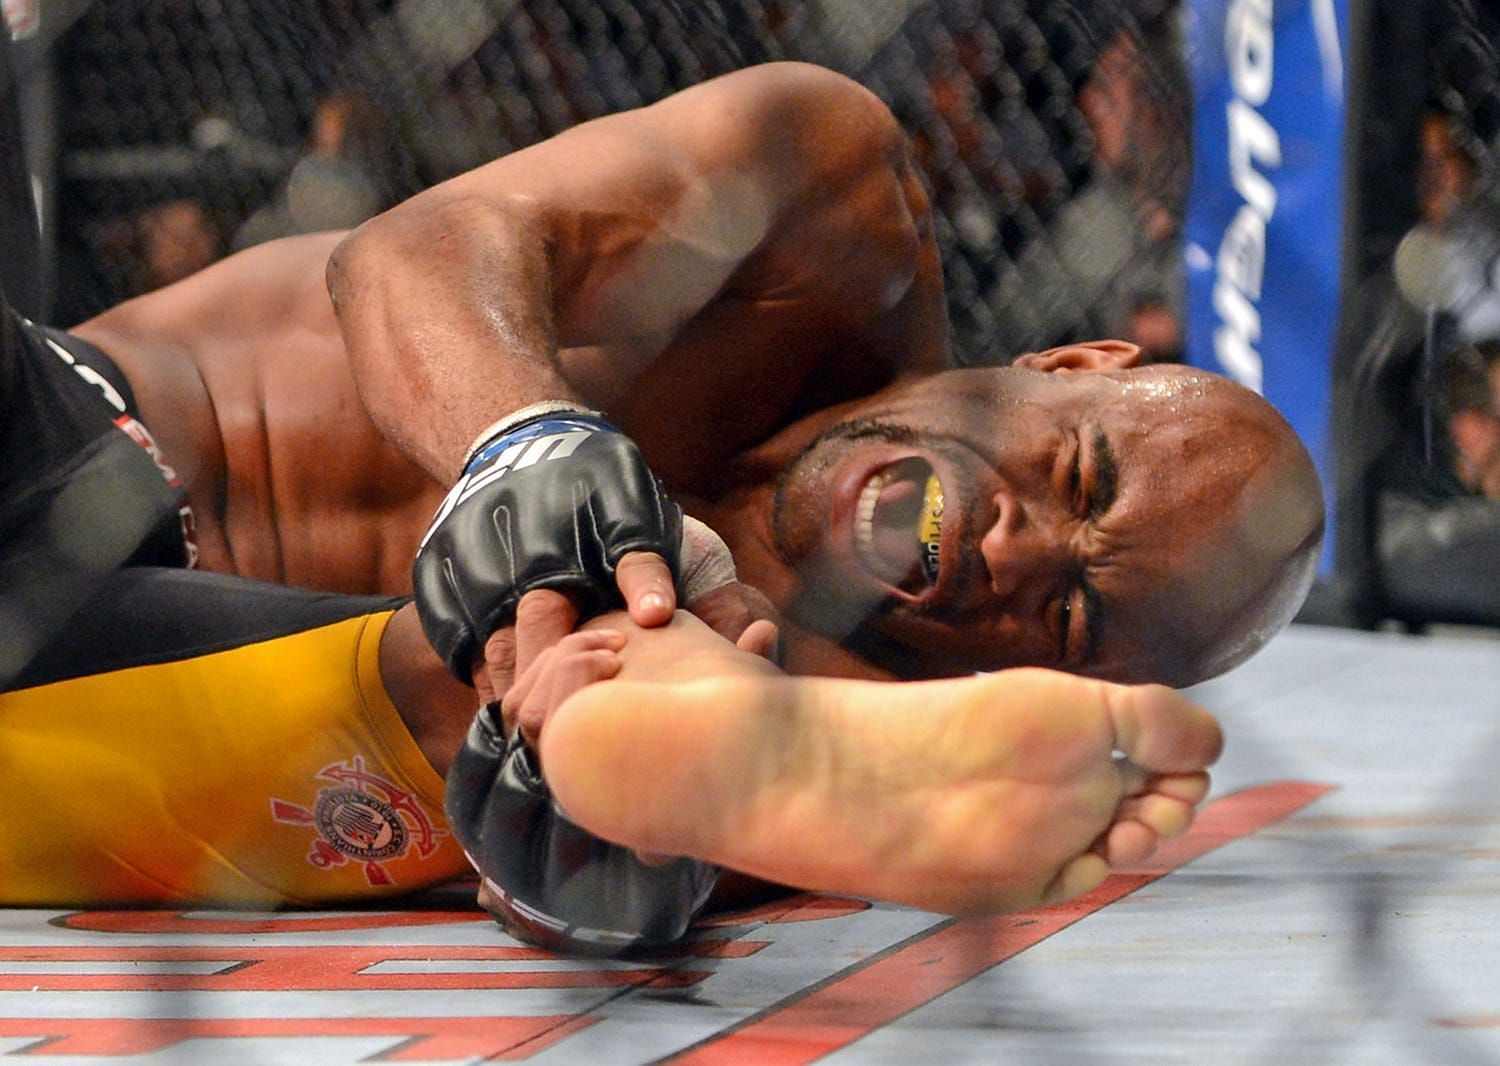 Anderson Silva was left in agony after a serious leg injury in his rematch with Chris Weidman